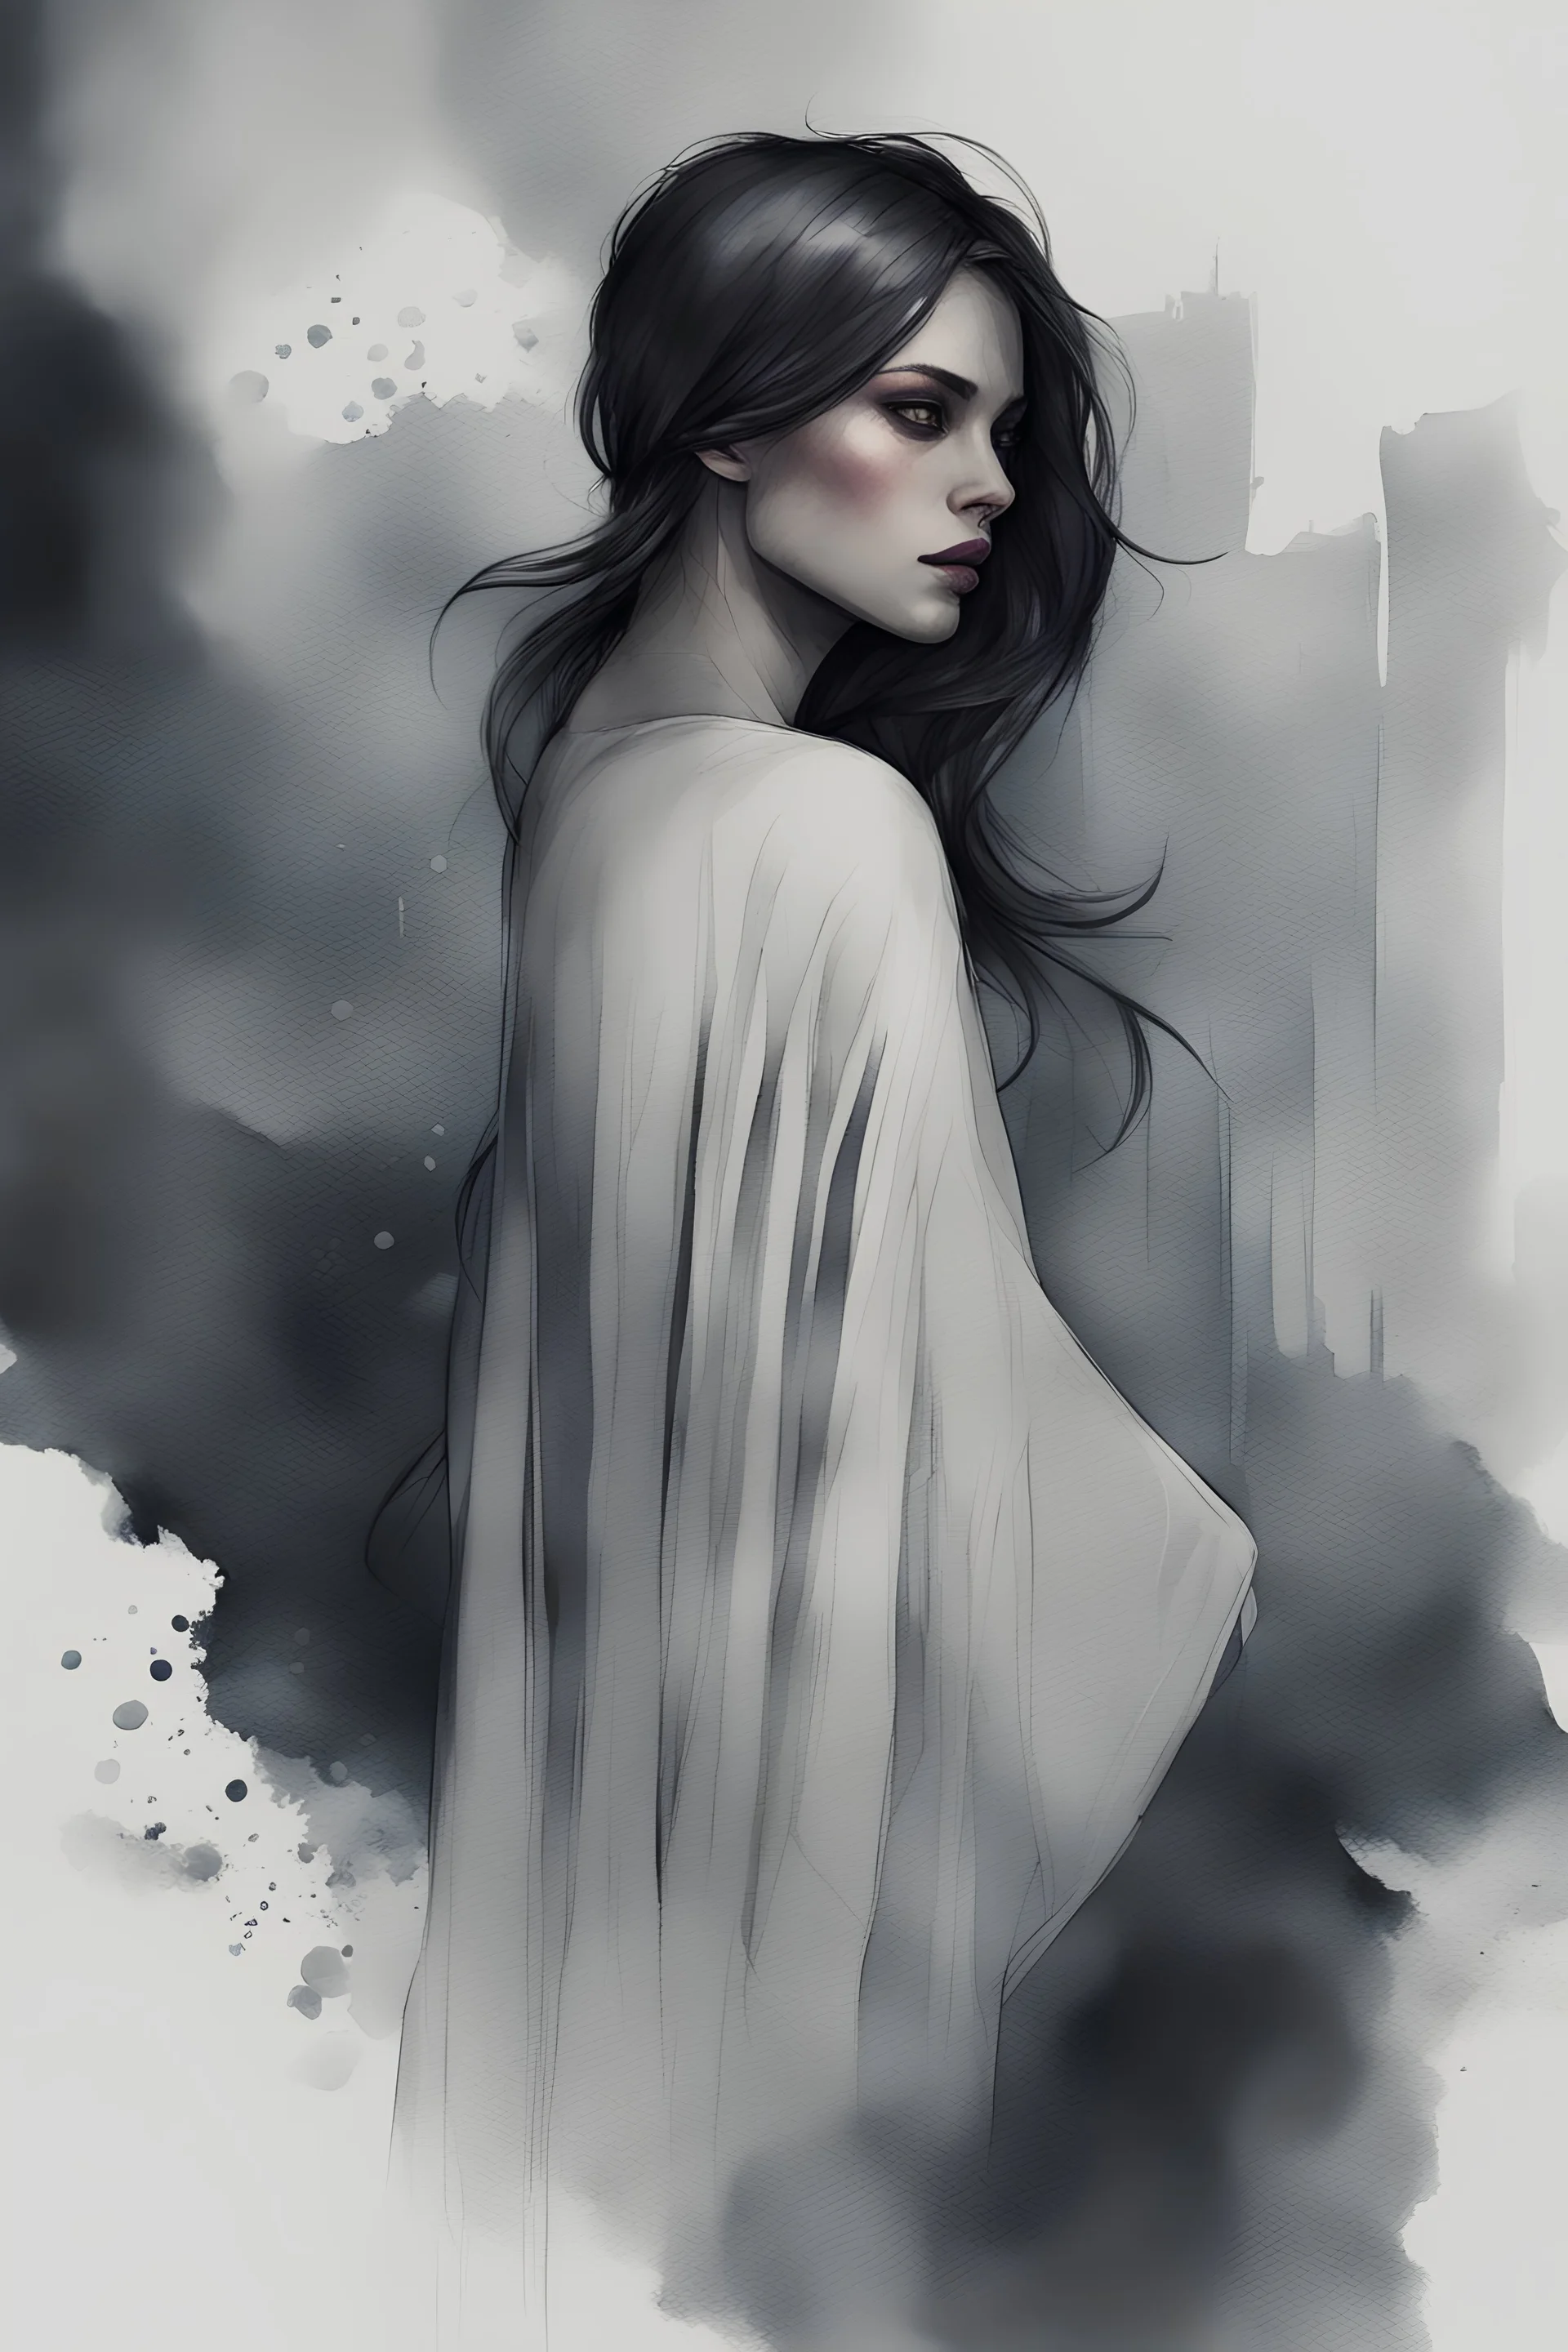 watercolor black style, mystical, transparent, ghost gotham city ,Trending on Artstation, {creative commons}, fanart, AIart, {Woolitize}, by Charlie Bowater, Illustration, Color Grading, Filmic, Nikon D750, Brenizer Method, Side-View, Perspective, Depth of Field, Field of View, F/2.8, Lens Flare, Tonal Colors, 8K, Full-HD, ProPhoto RGB, Perfectionism, Rim Lighting, Natural Lighting, Soft Lighting, Accent Lighting, Diffraction Grading, With Imperfections, insan